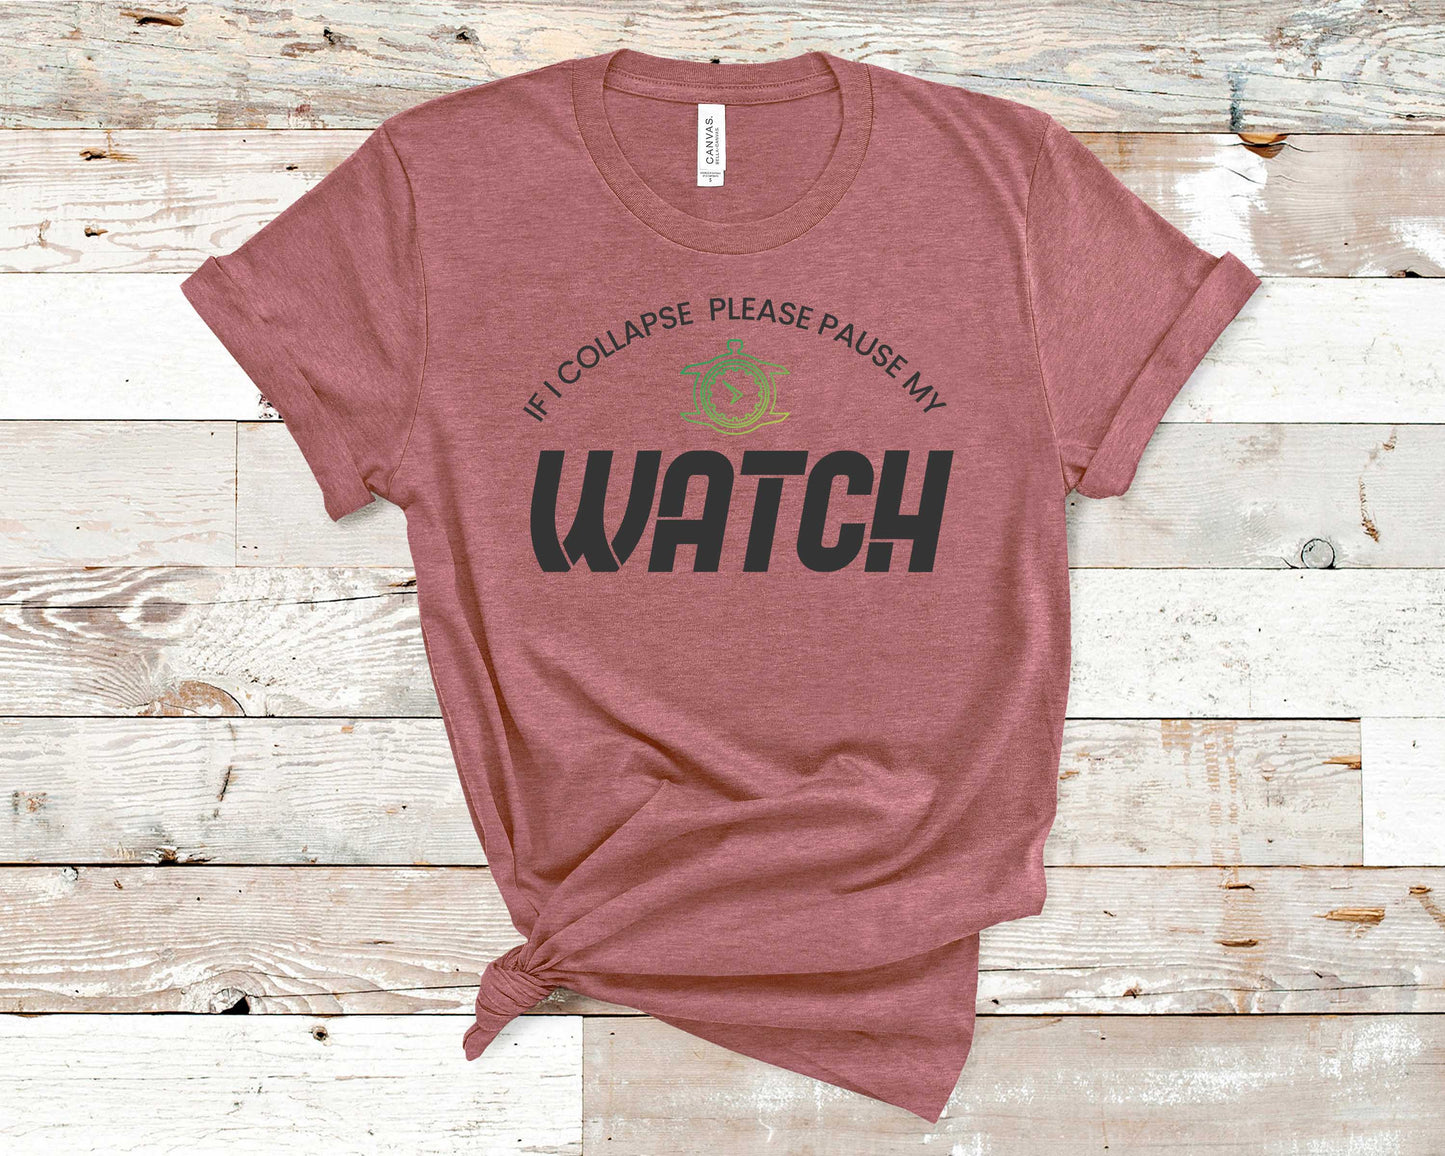 If I Collapse Please Pause My Watch - Fitness Shirt